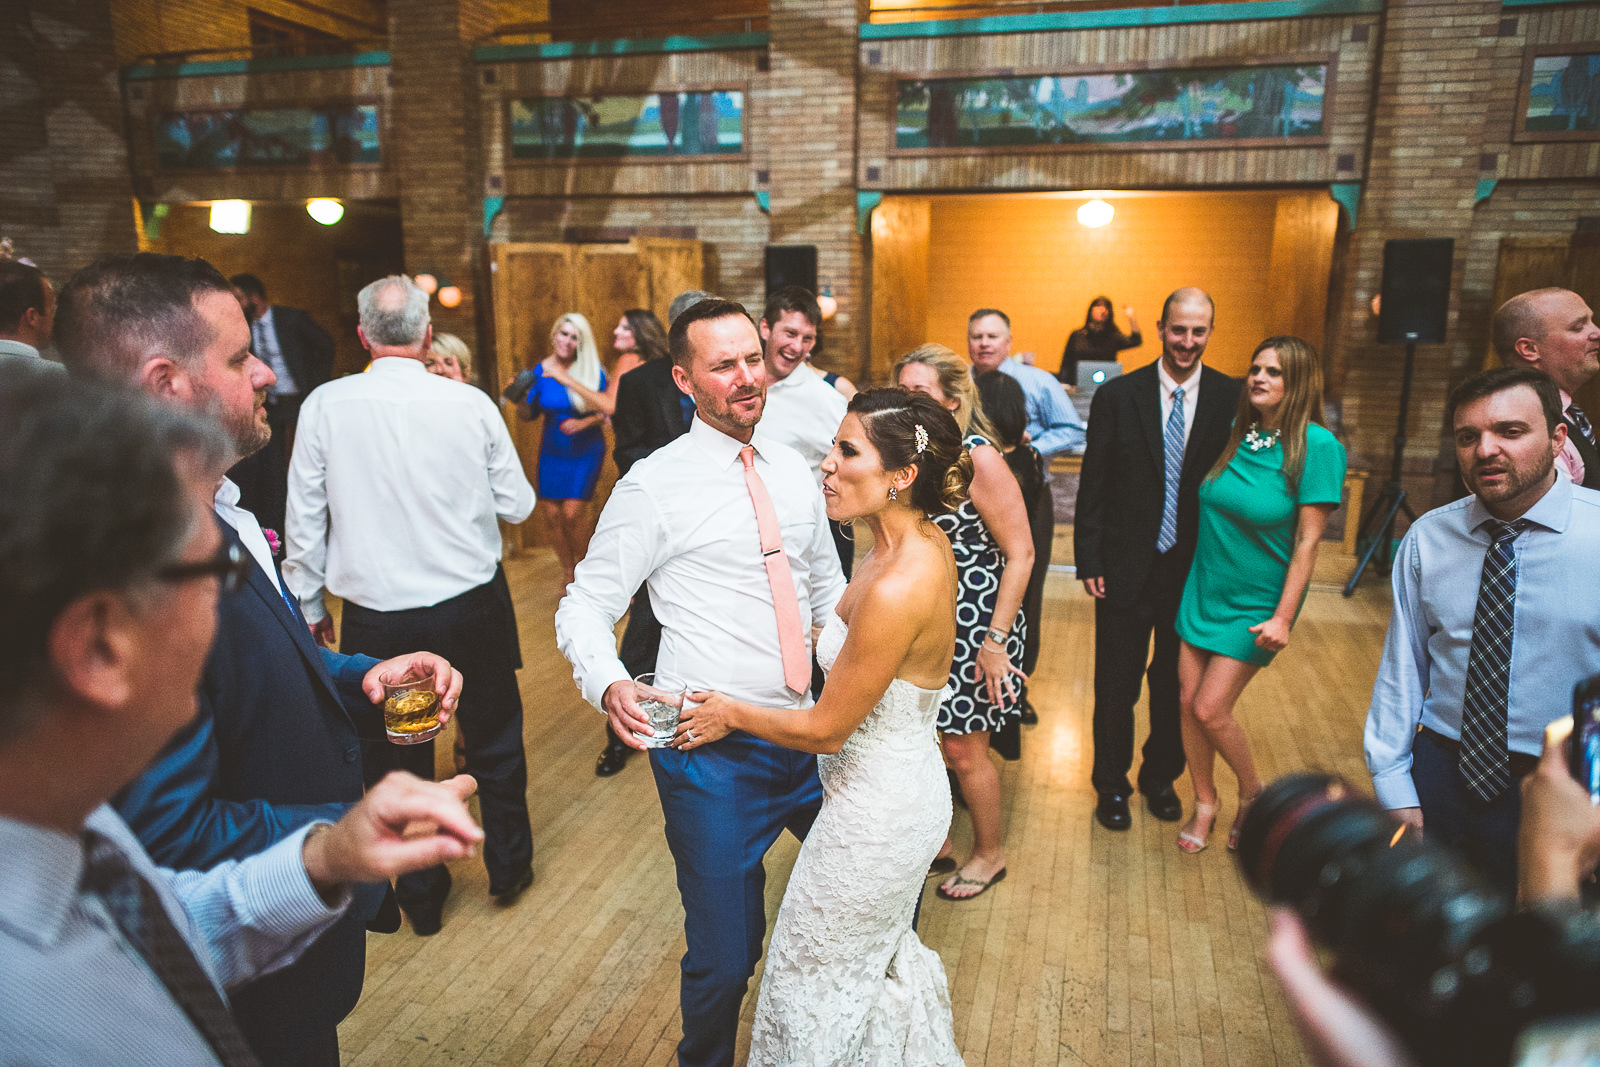 72 party time at wedding - Natalie + Alan // Chicago Wedding Photographer at Cafe Brauer